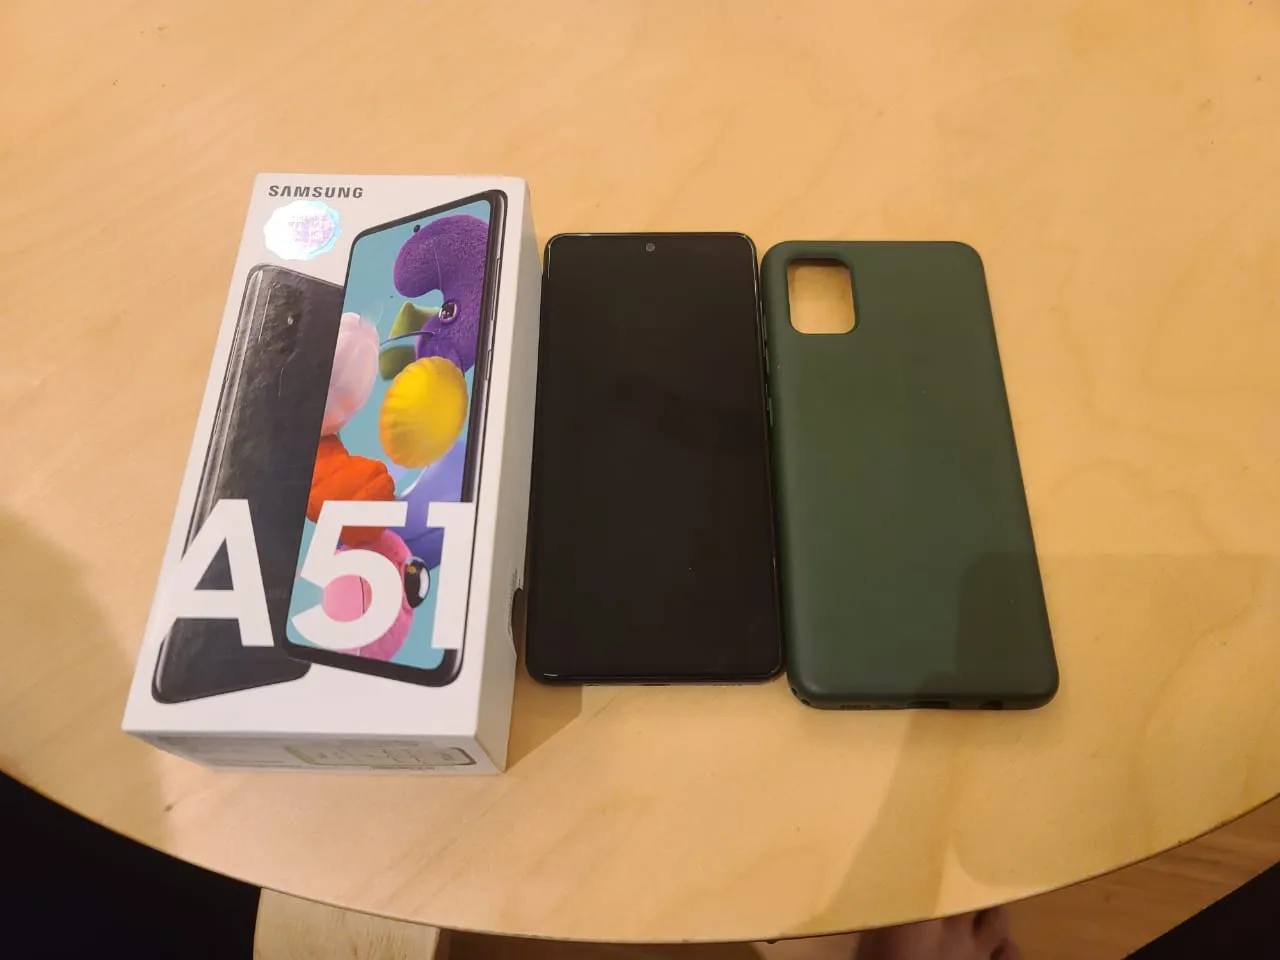 Samsung A51 for sale - photo 1